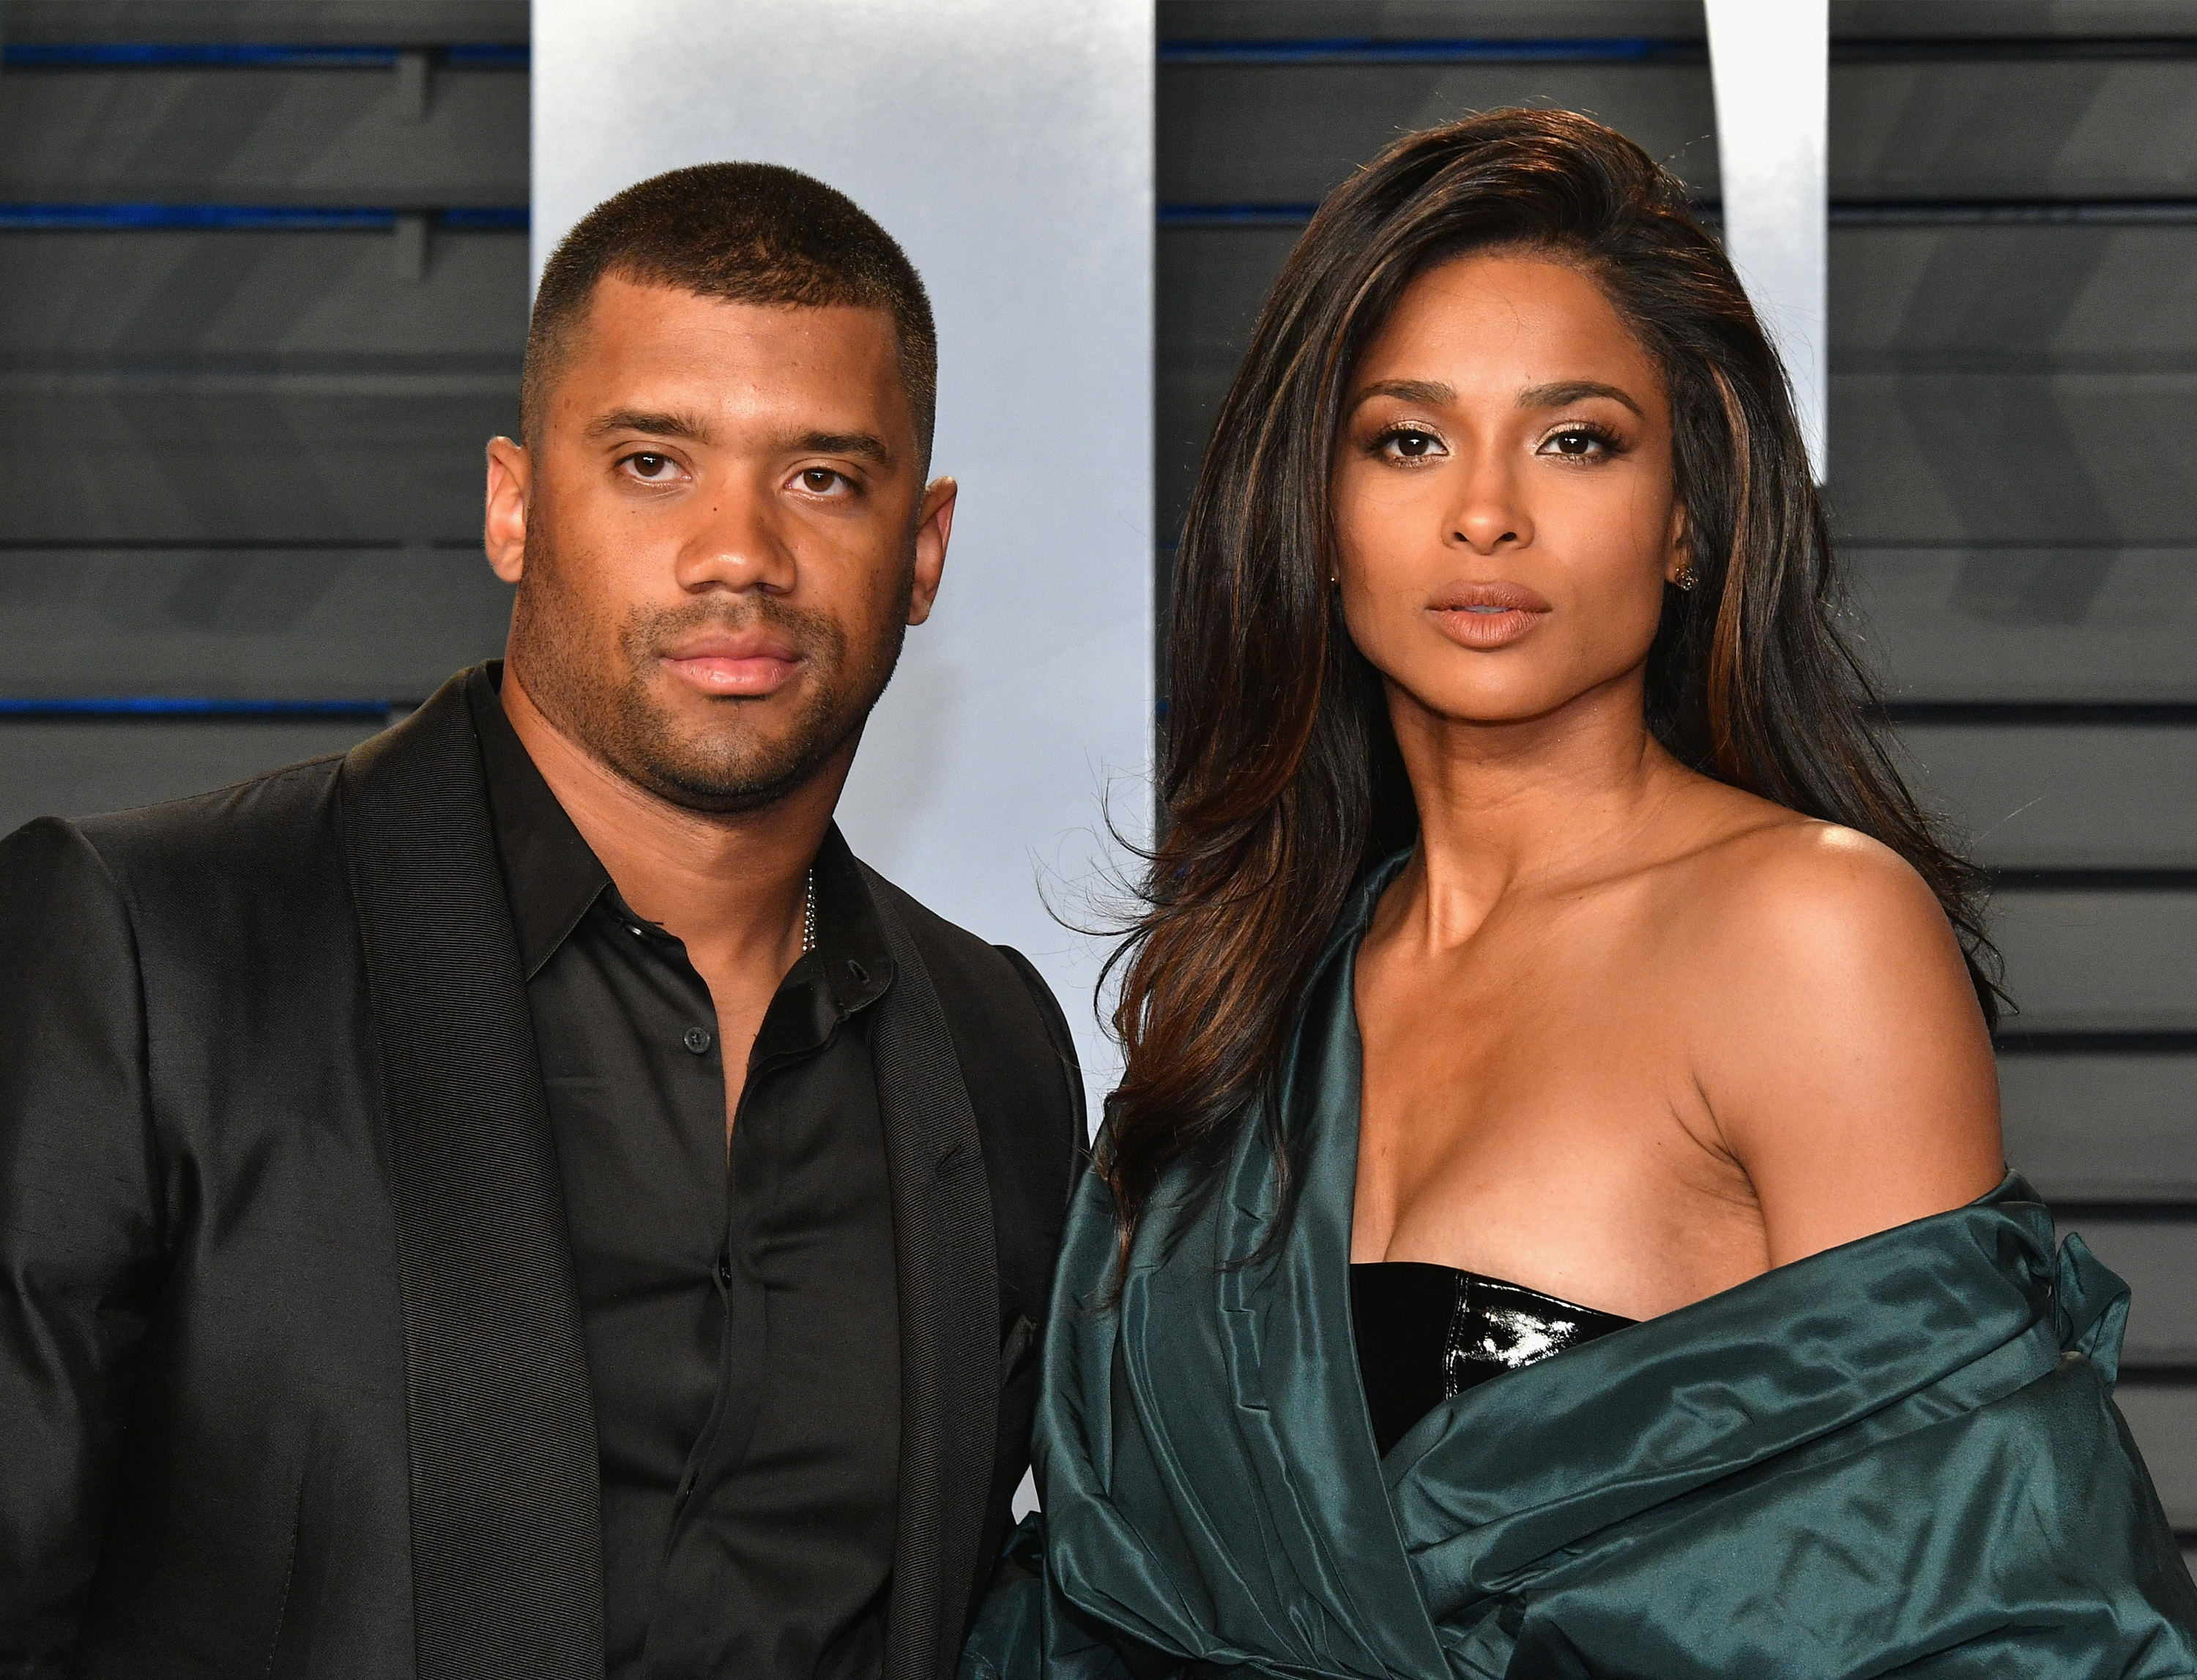 Russell Wilson and Ciara attend the 2018 Vanity Fair Oscar Party hosted by Radhika Jones at Wallis Annenberg Center for the Performing Arts on March 4, 2018, in Beverly Hills, California. | Source: Getty Images